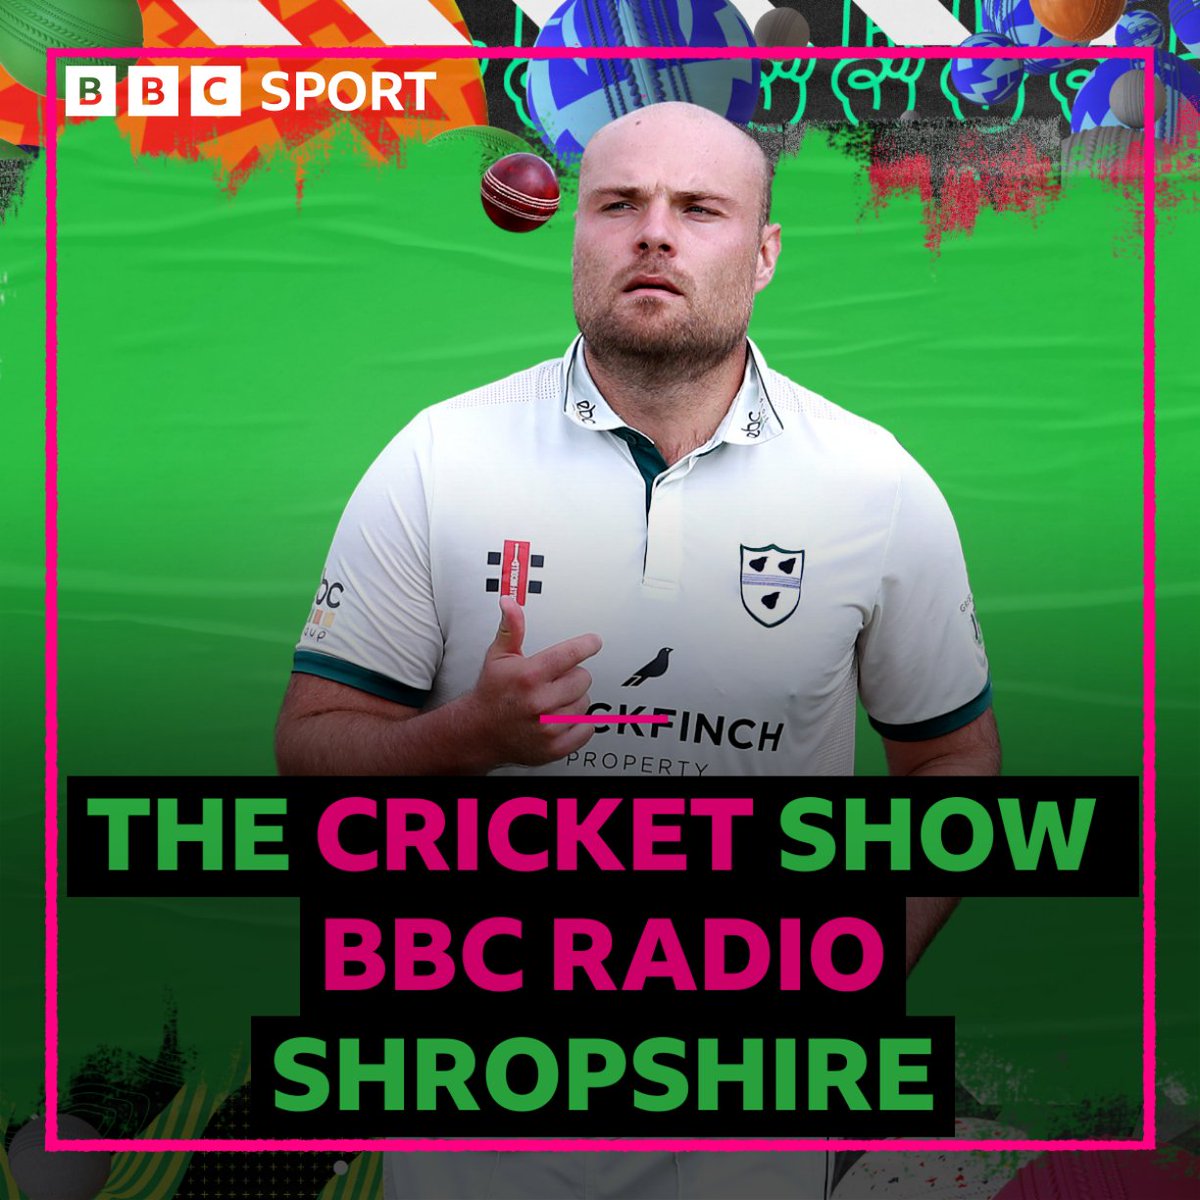 🏏 NEW CRICKET SHOW TONIGHT! 🏏 @BBCShropSport first ever episode of 'The Cricket Show' starts tonight 6pm... Featuring @joeleach230 @FootieNick exploring @shropshireccc partnership with @WorcsCCC 🗣️ @CowCornerPod on weekend games 🗣️ @SevernSapphires new beginnings…